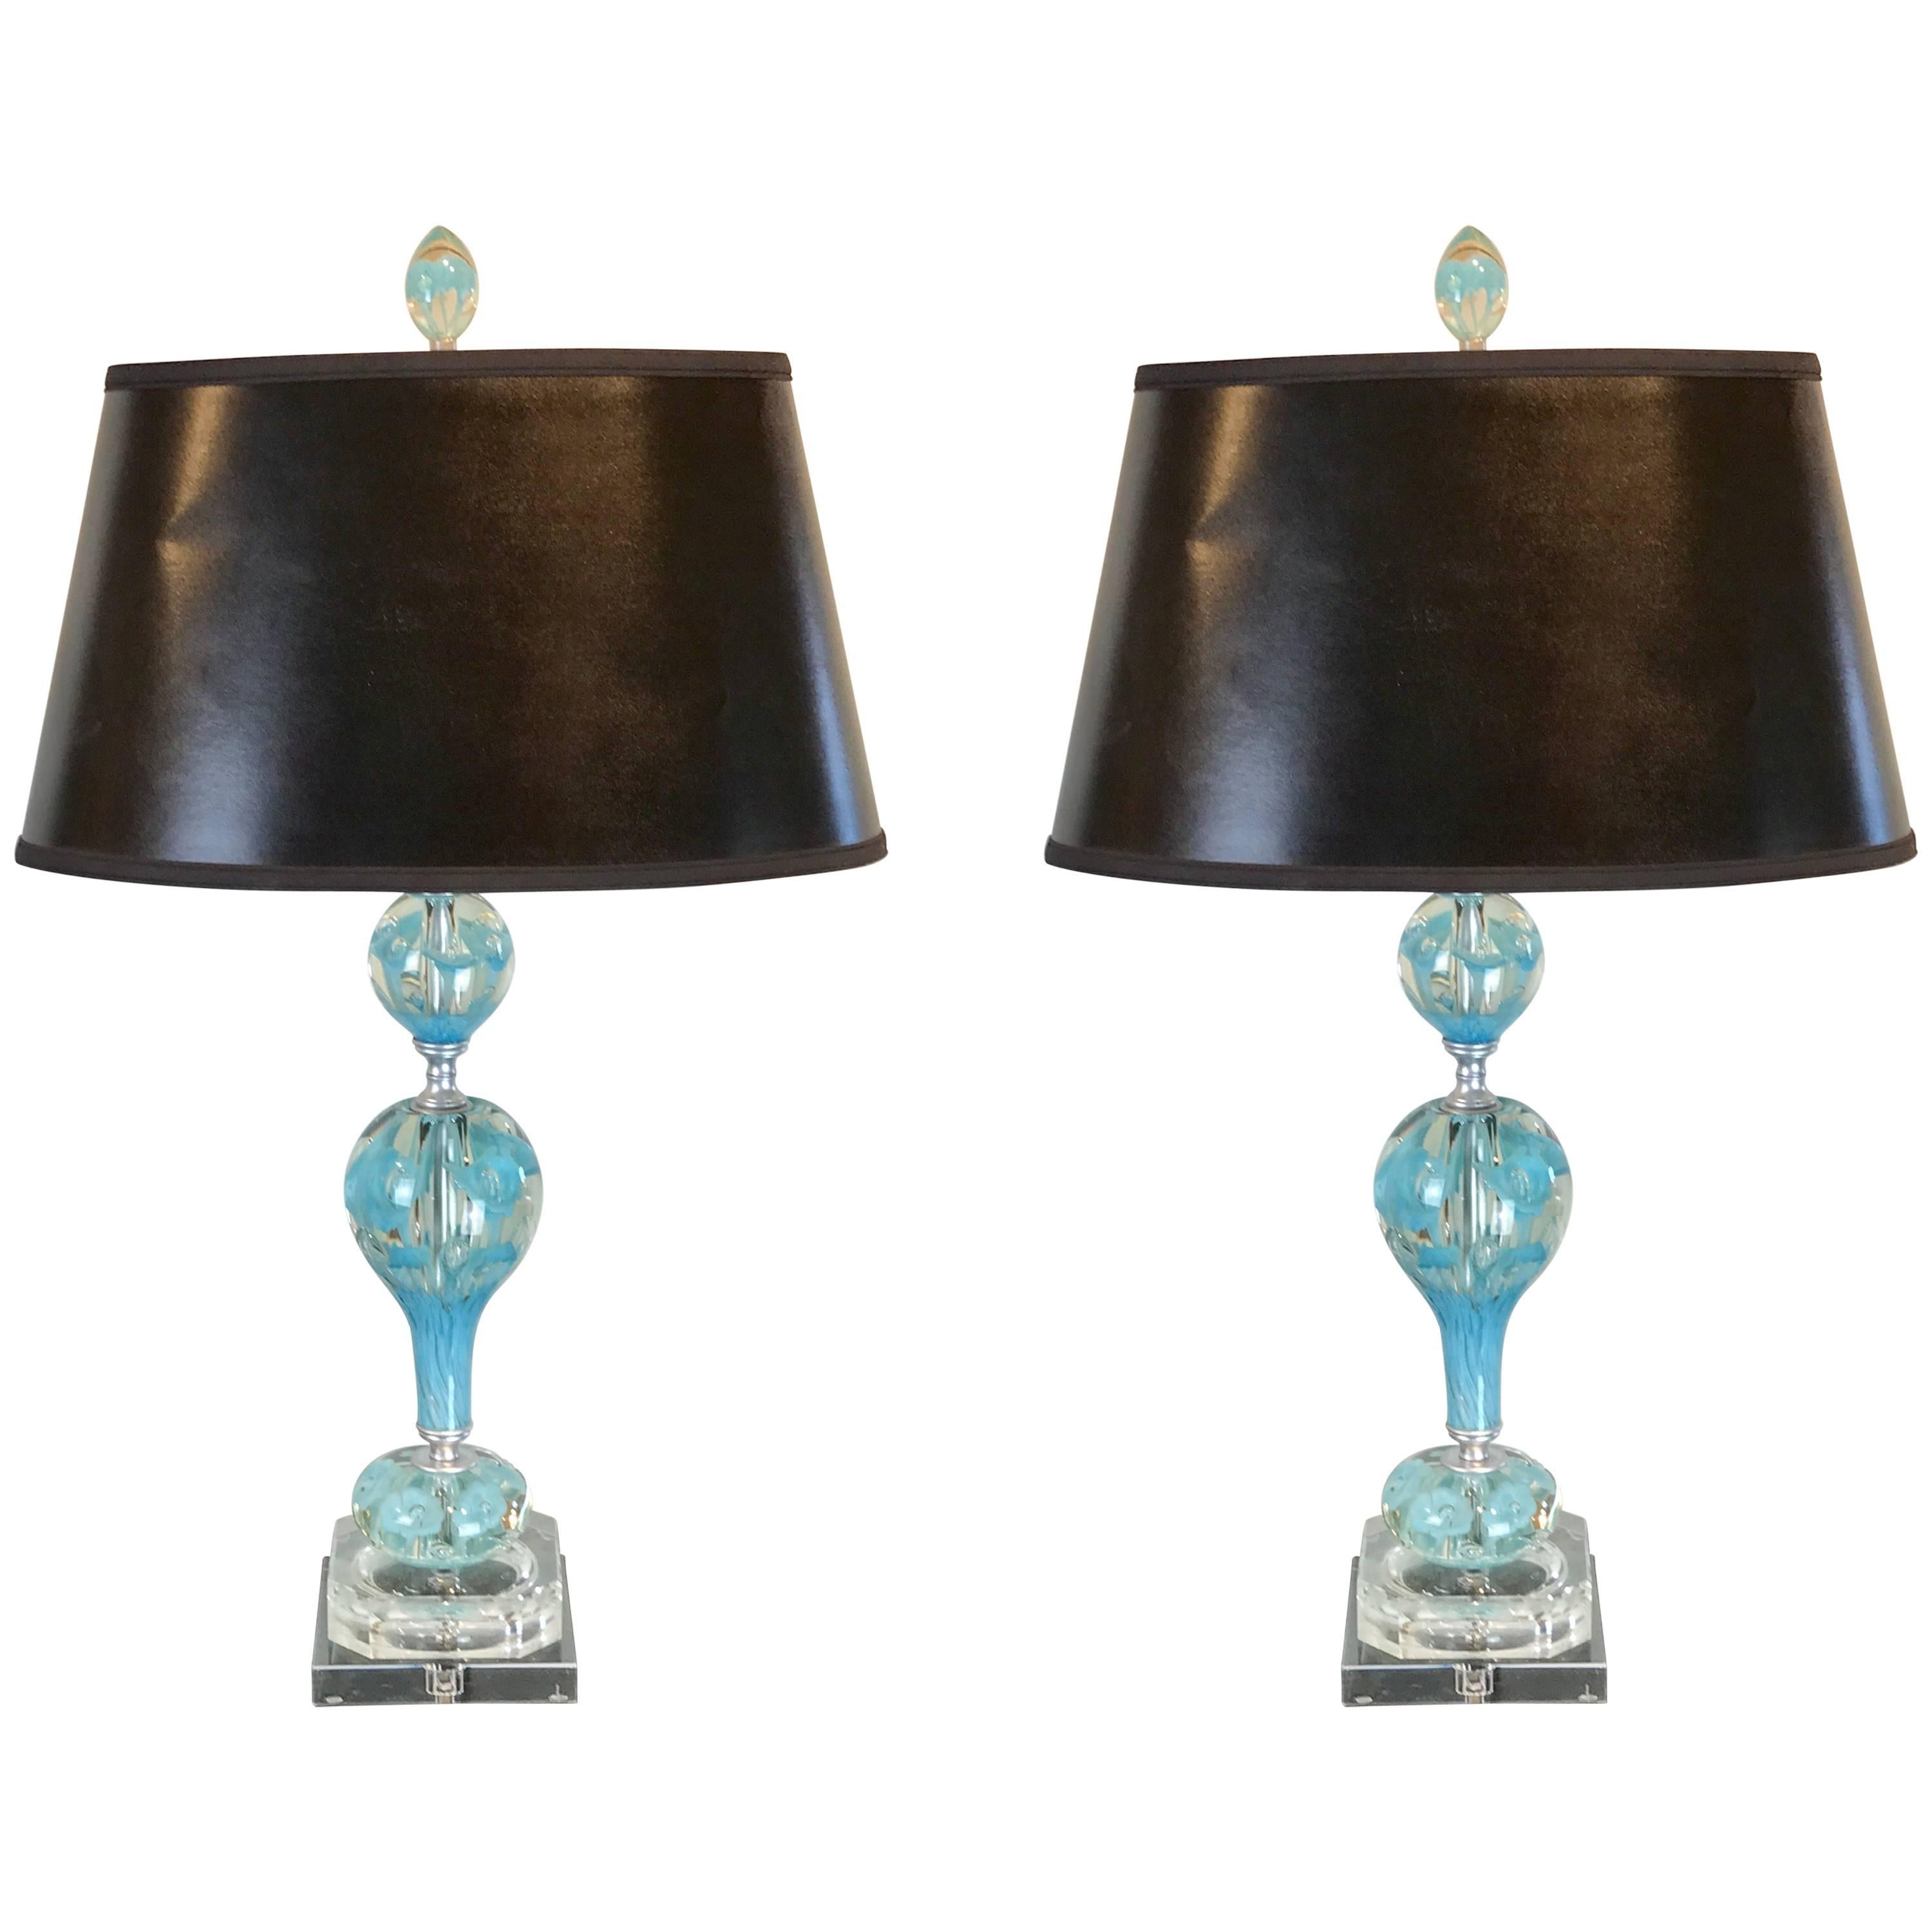 Midcentury Murano Style Glass and Brass Lamps in Turquoise For Sale